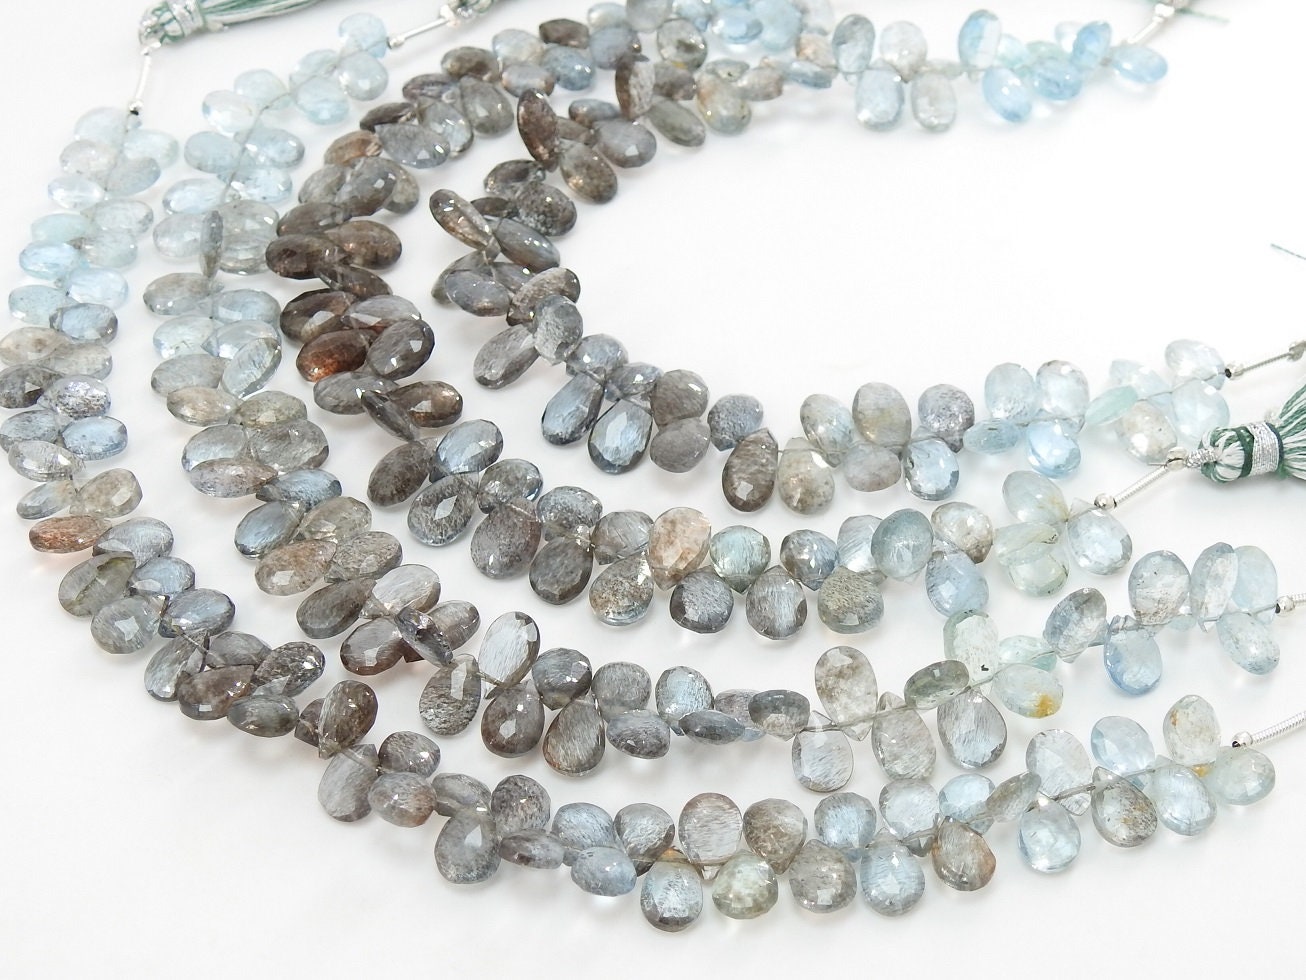 Moss Aquamarine Faceted Teardrop,Multi Shaded,Loose Bead 8Inch 9X6To8X5MM Approx Wholesale Price,New Arrival,100%Natural BB(BR4) | Save 33% - Rajasthan Living 12